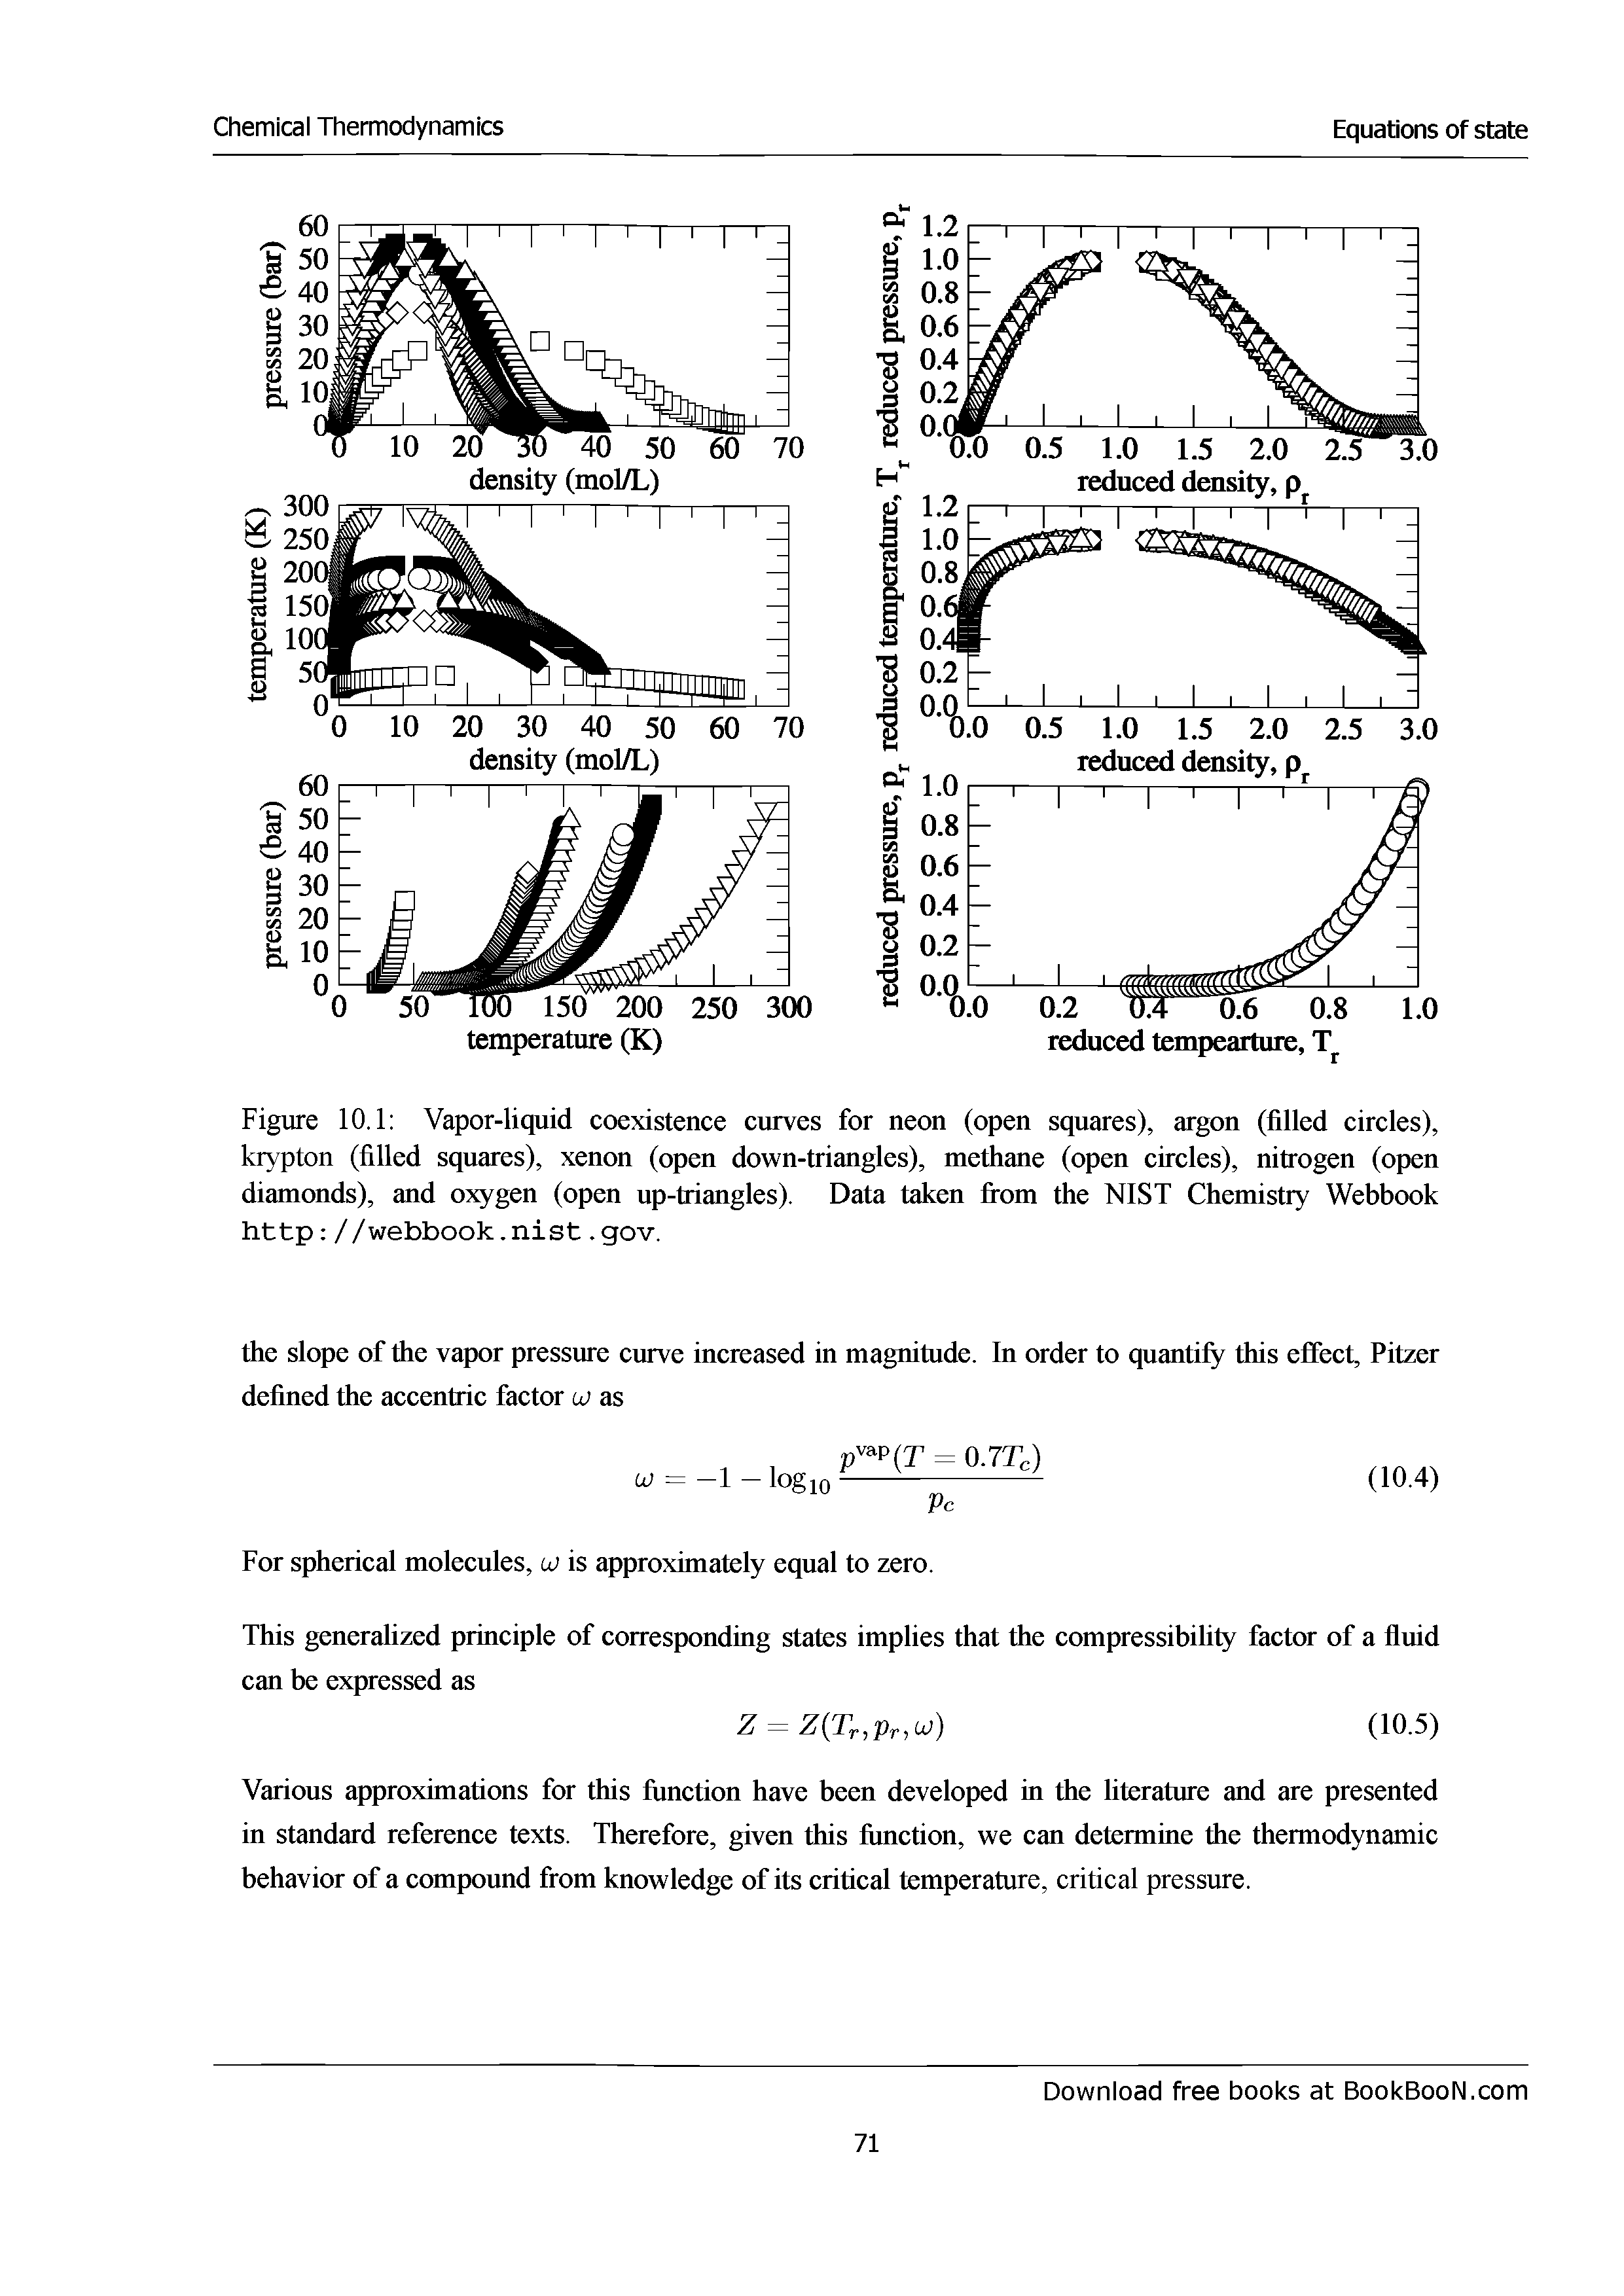 Figure 10.1 Vapor-liquid coexistence curves for neon (open squares), argon (filled circles), krypton (filled squares), xenon (open down-triangles), methane (open circles), nitrogen (open diamonds), and oxygen (open up-triangles). Data taken from the NIST Chemistry Webbook http //webbook.nist.gov.